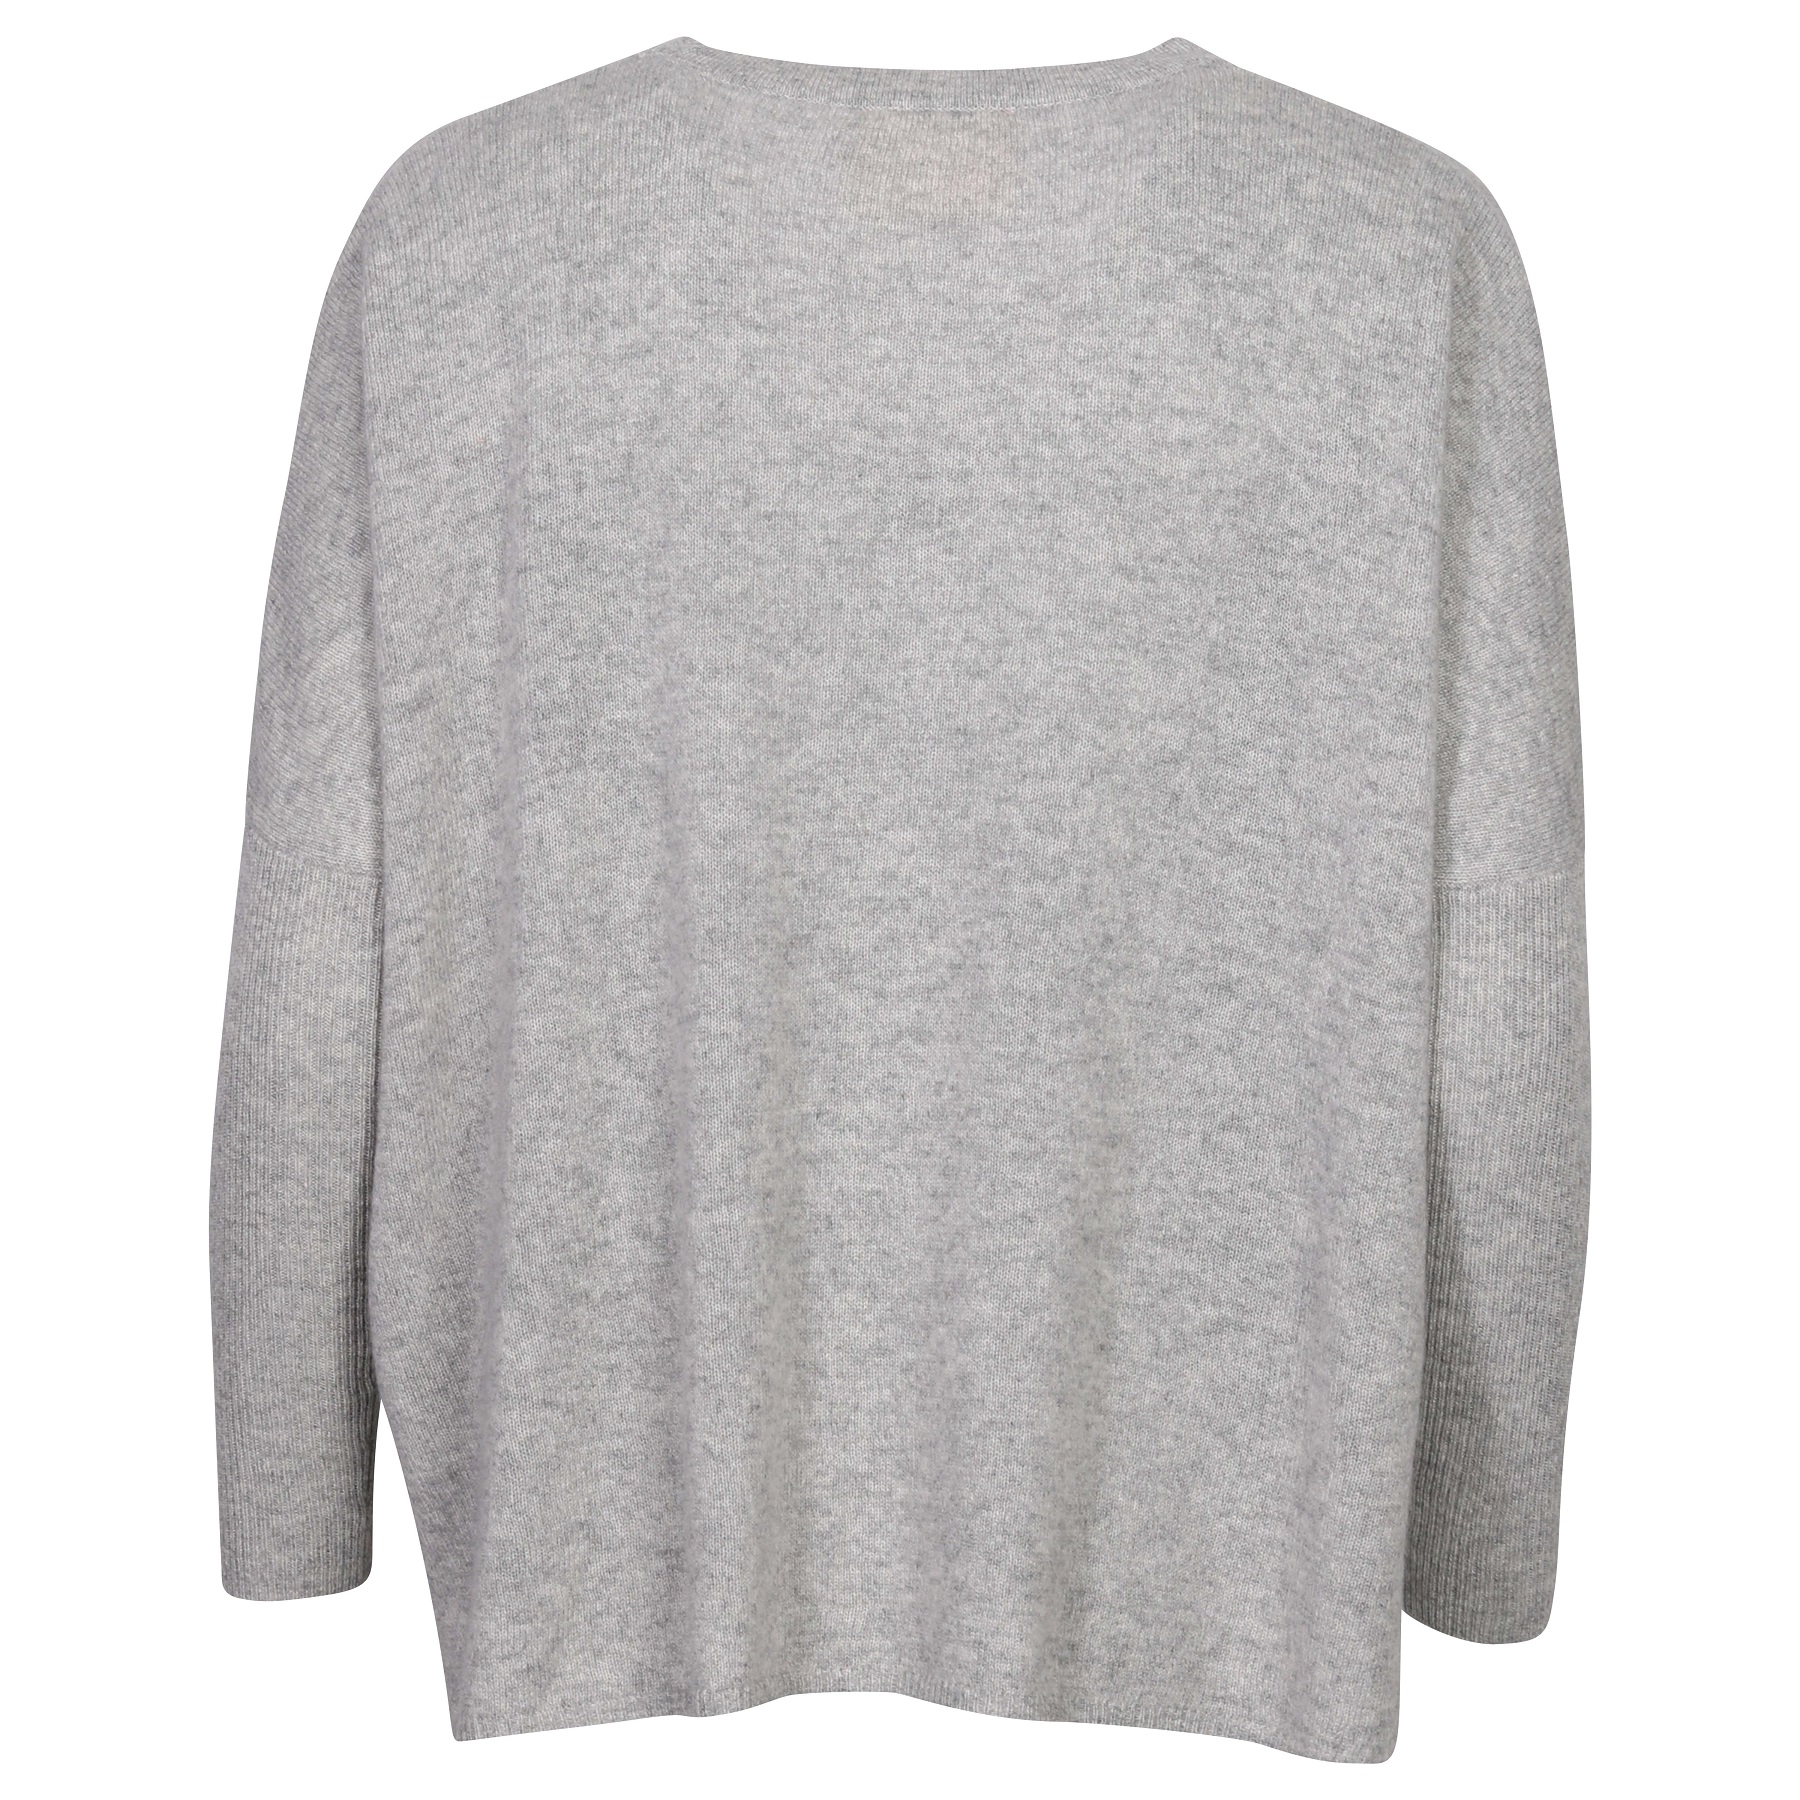 Absolut Cashmere Poncho Cardigan in Grey Melange S